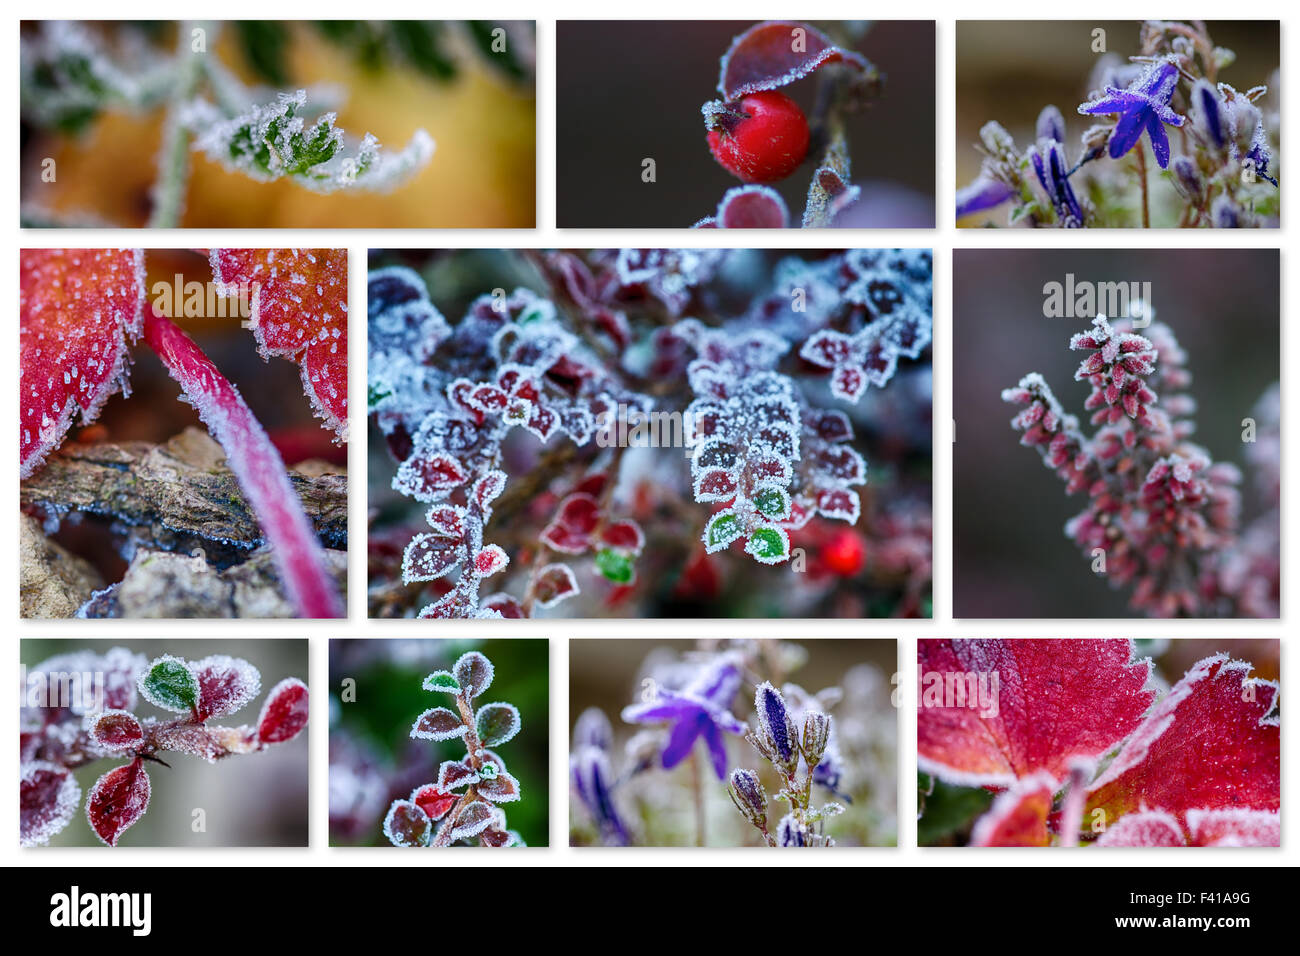 Icy nature collage Stock Photo